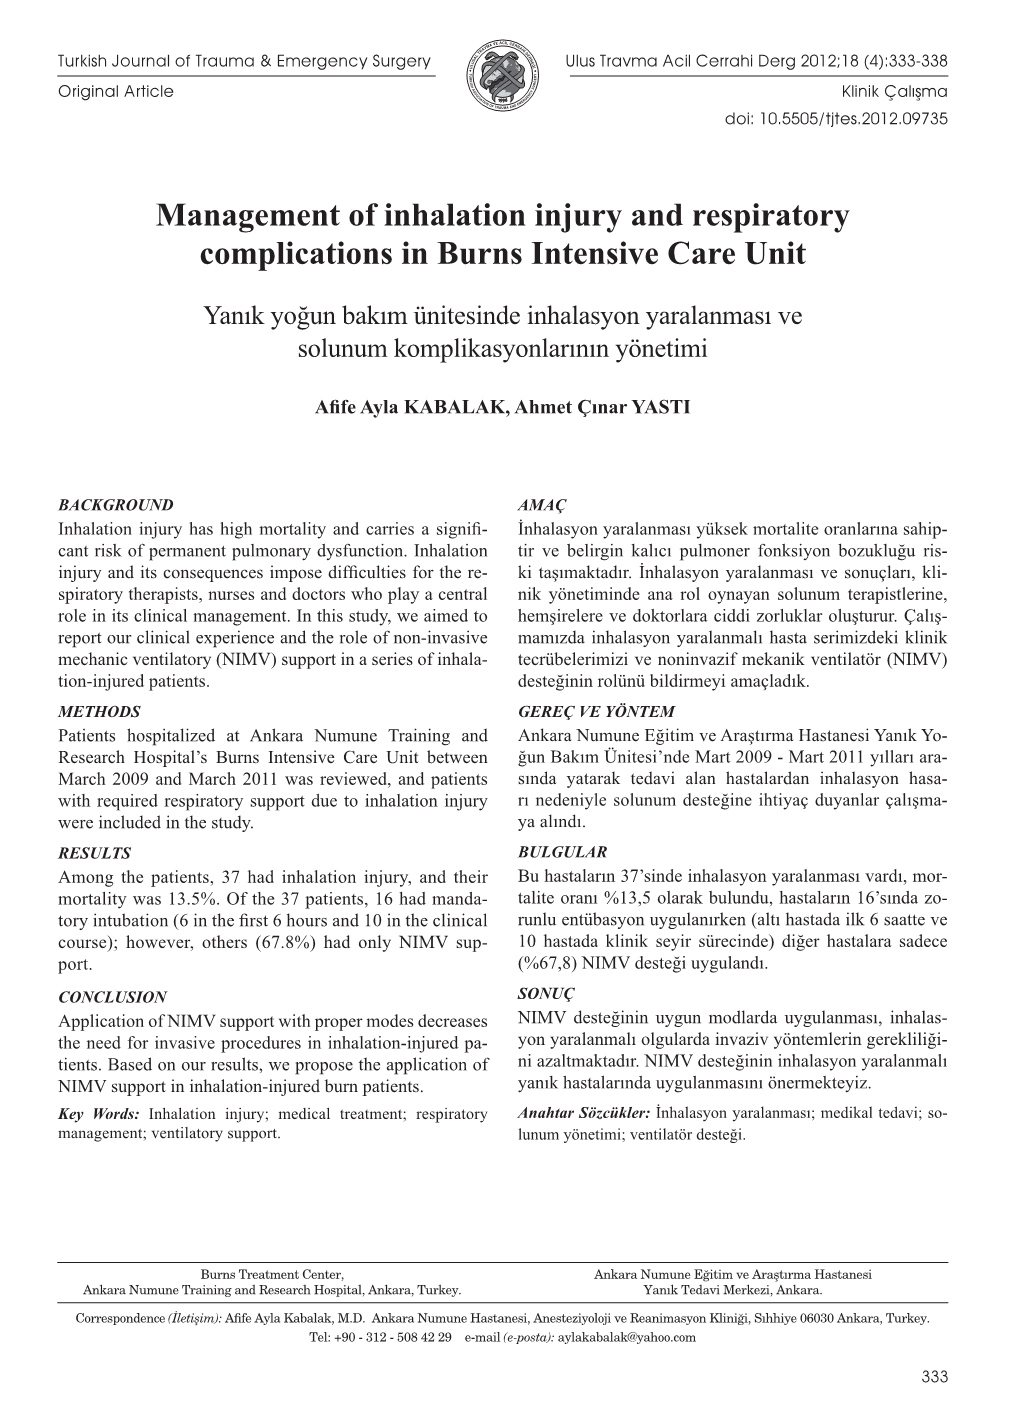 Management of Inhalation Injury and Respiratory Complications in Burns Intensive Care Unit